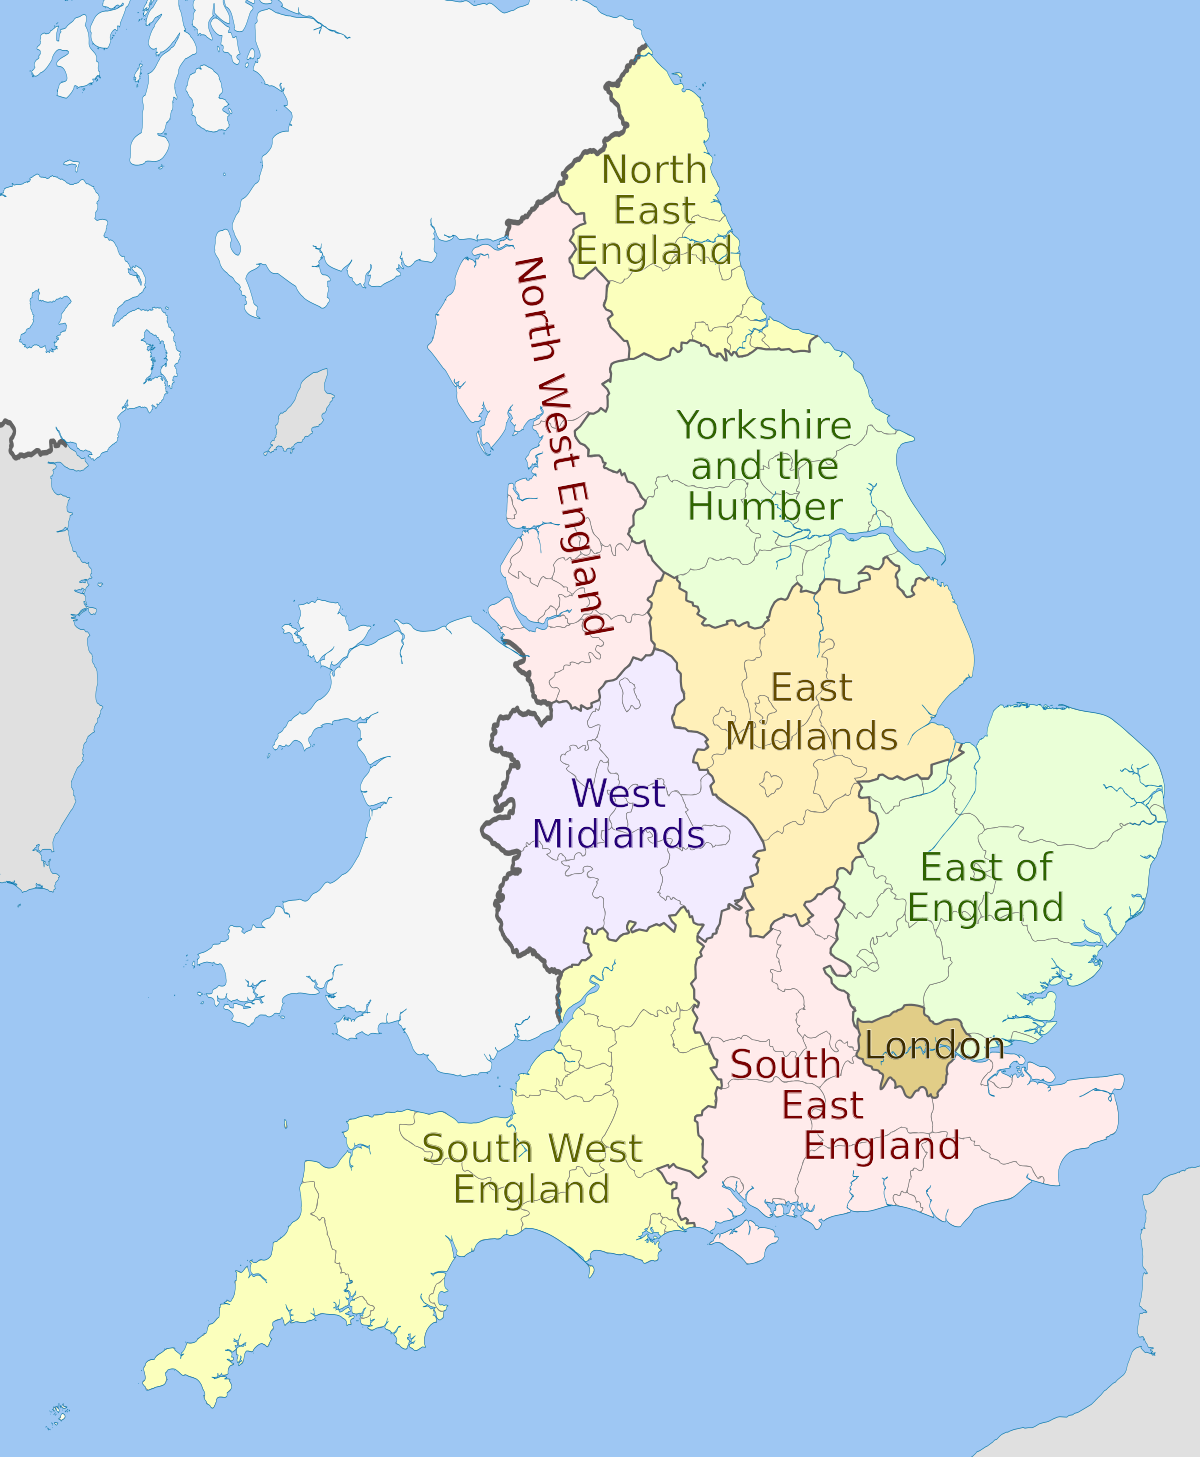 Engeland / De charme van Engeland: pragmatisch doormodderen - NRC : England is the largest and, with 55 million inhabitants, by far the most populous of the united kingdom's constituent countries.